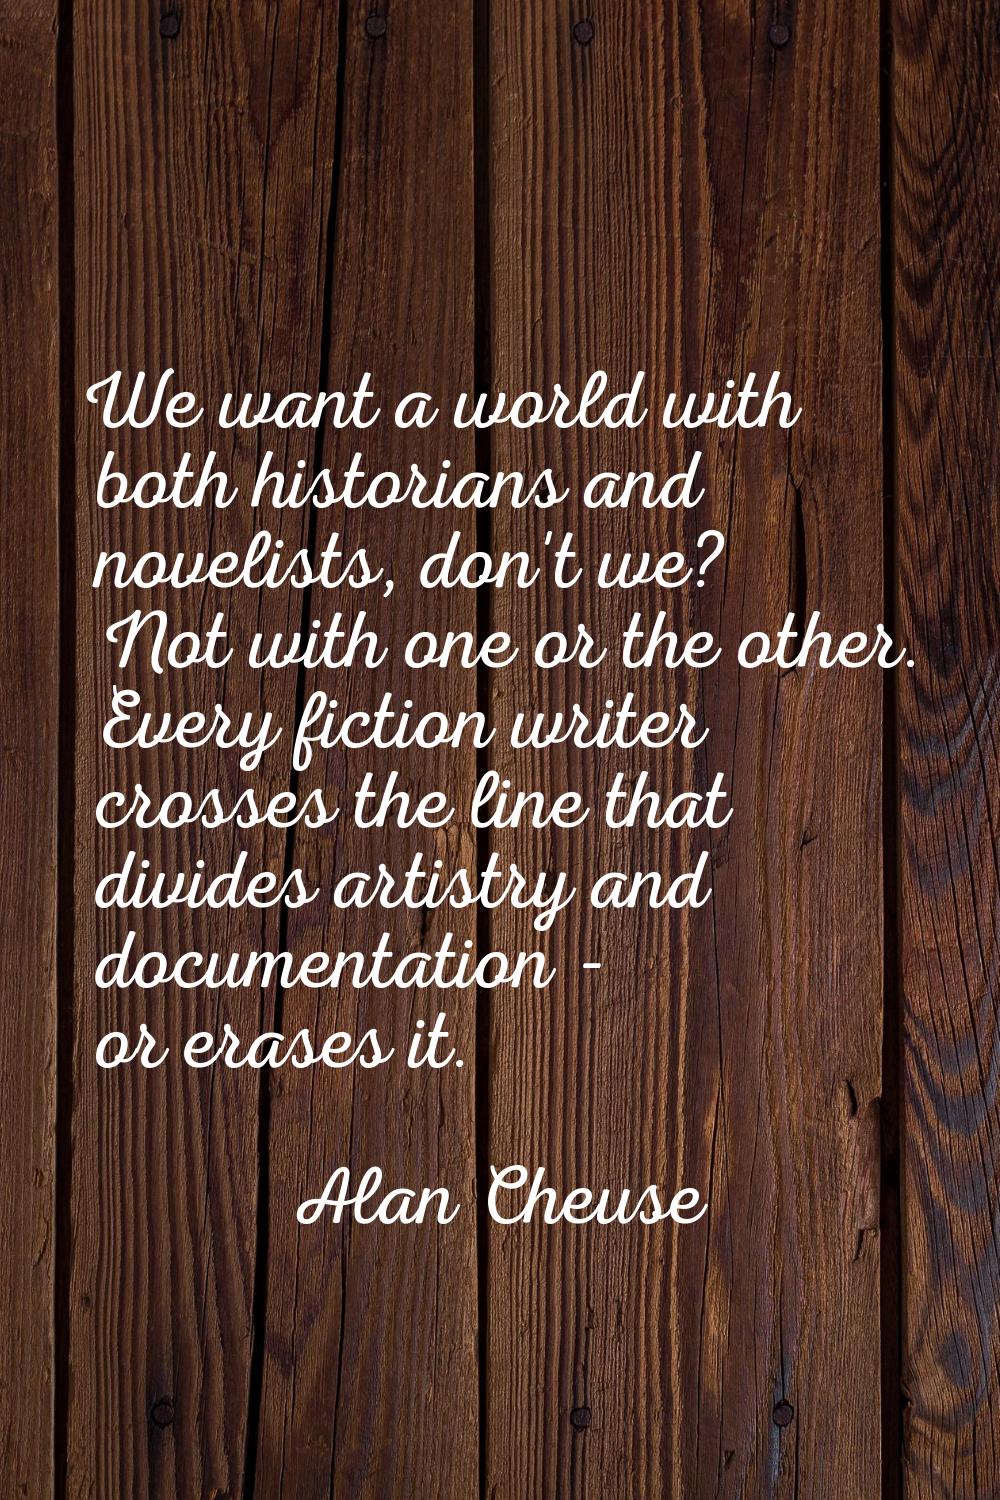 We want a world with both historians and novelists, don't we? Not with one or the other. Every fict